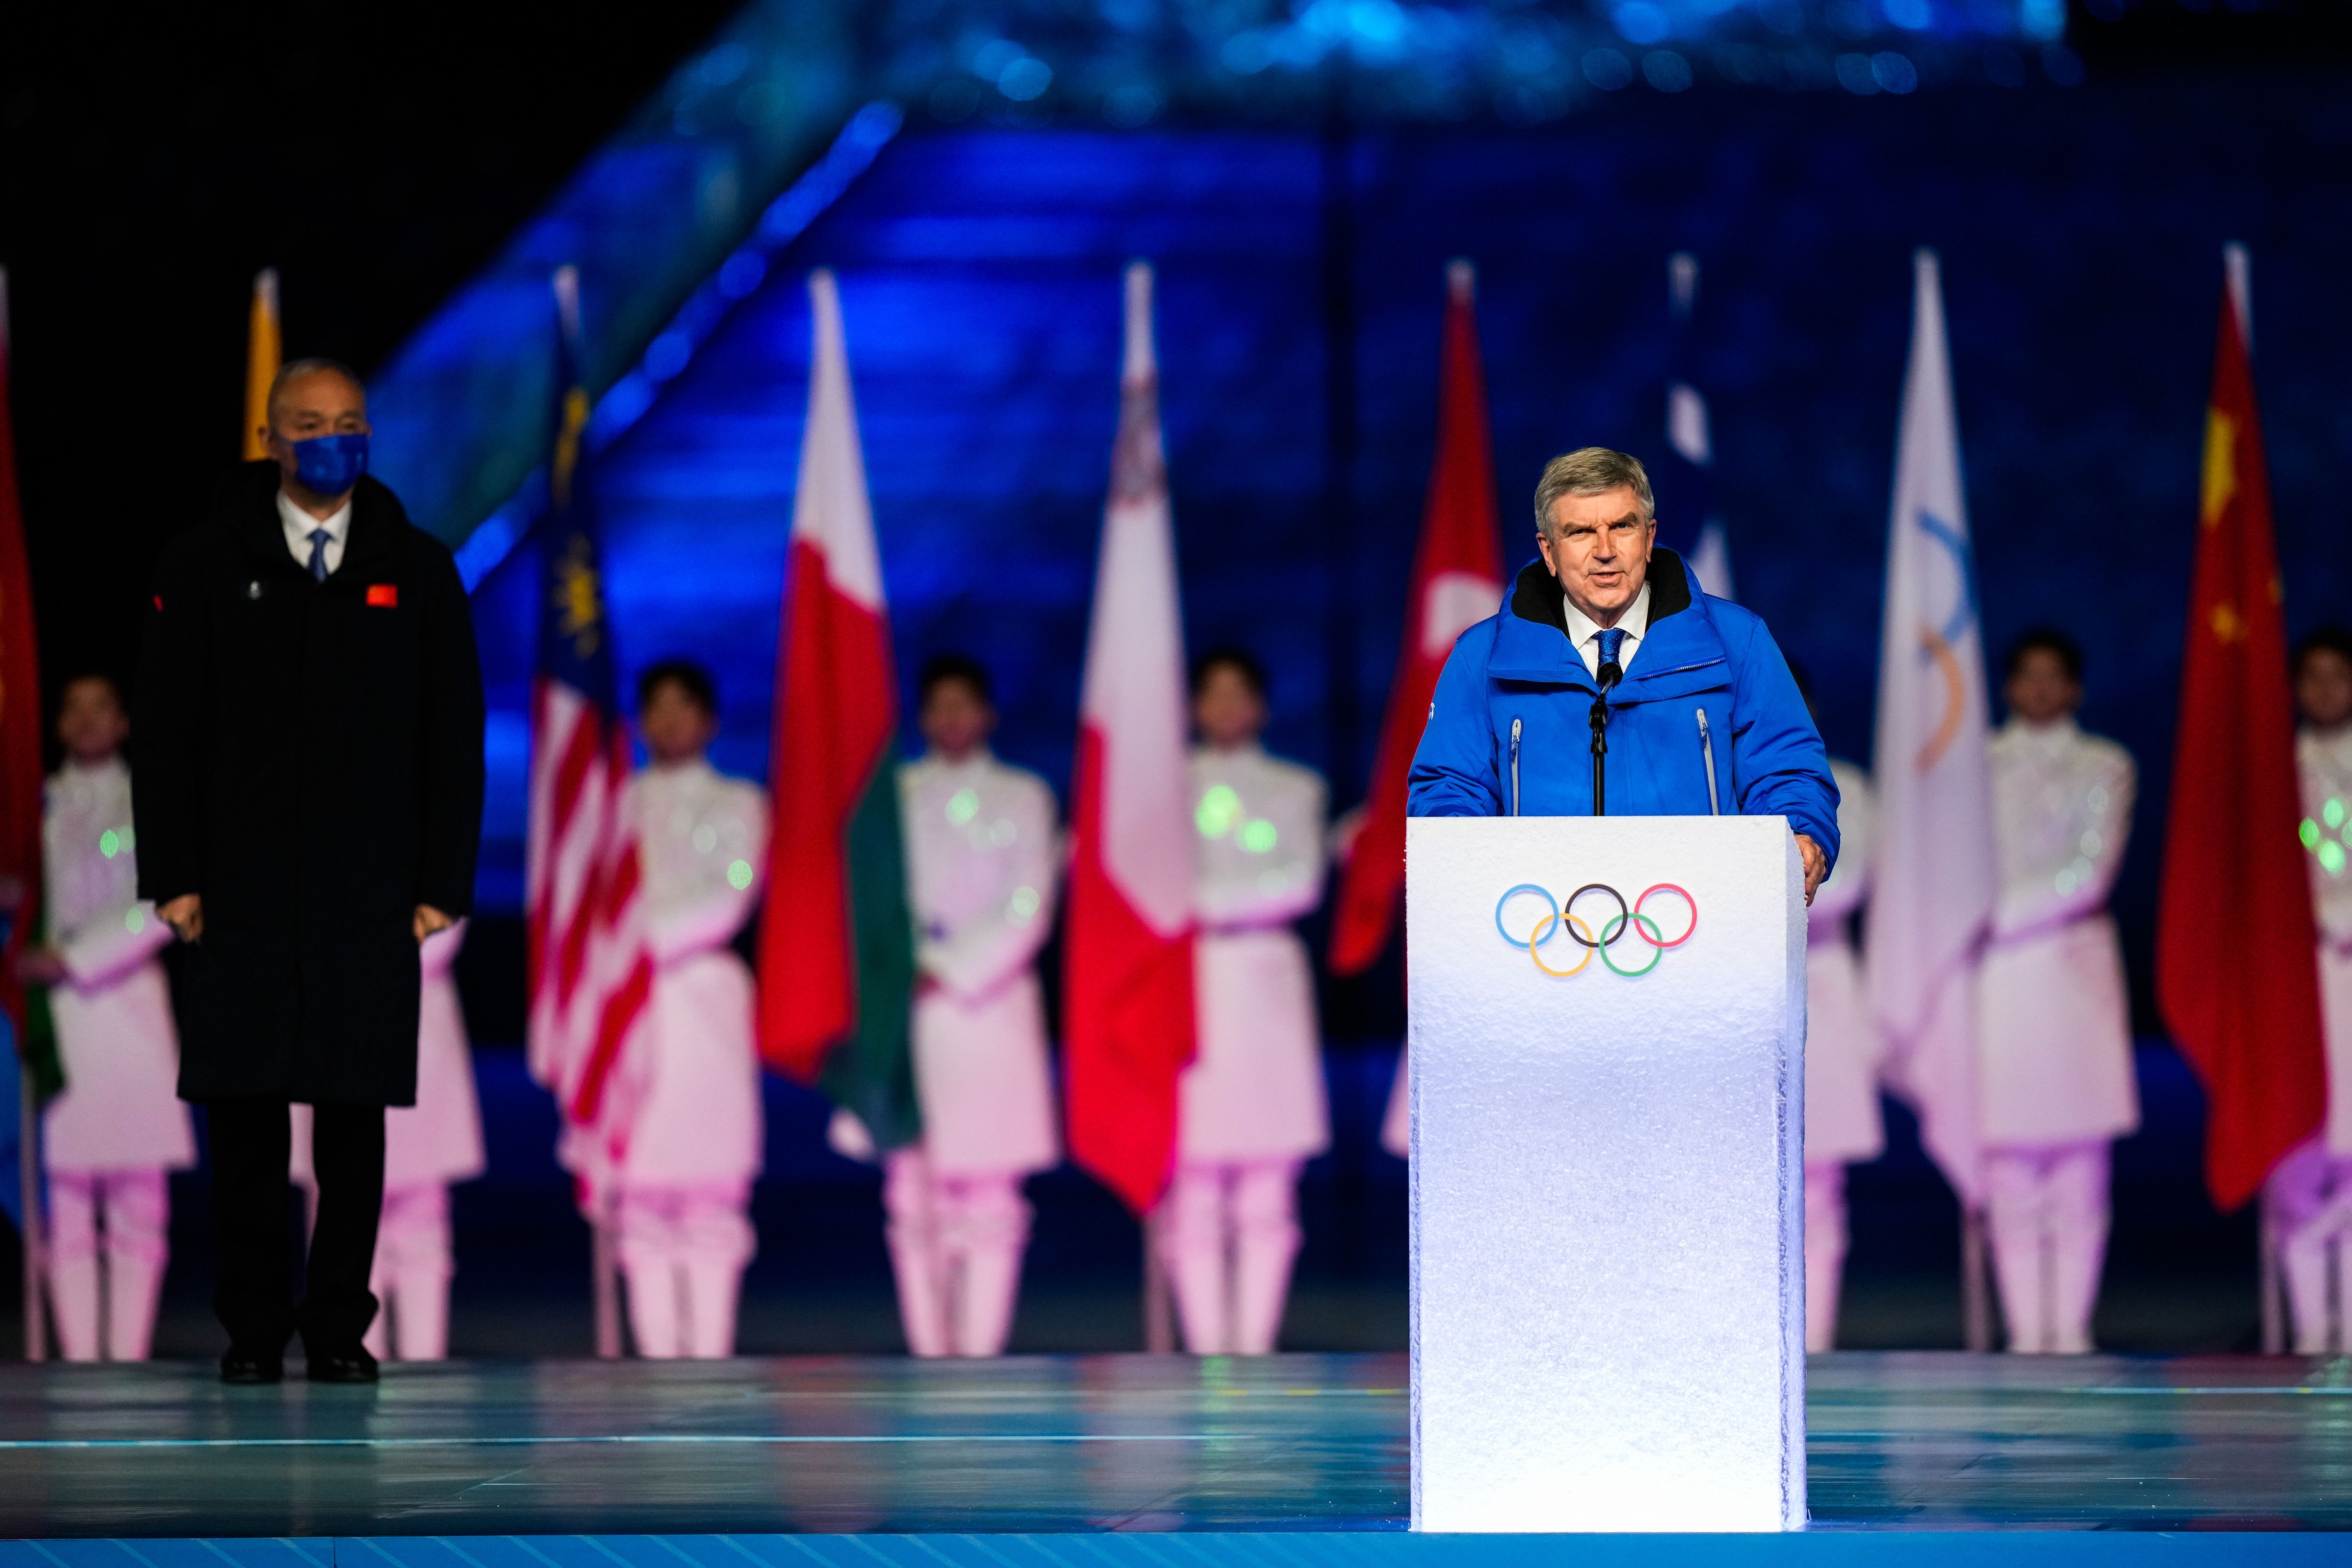 International Olympic Committee President Thomas Bach speaks during the closing ceremony